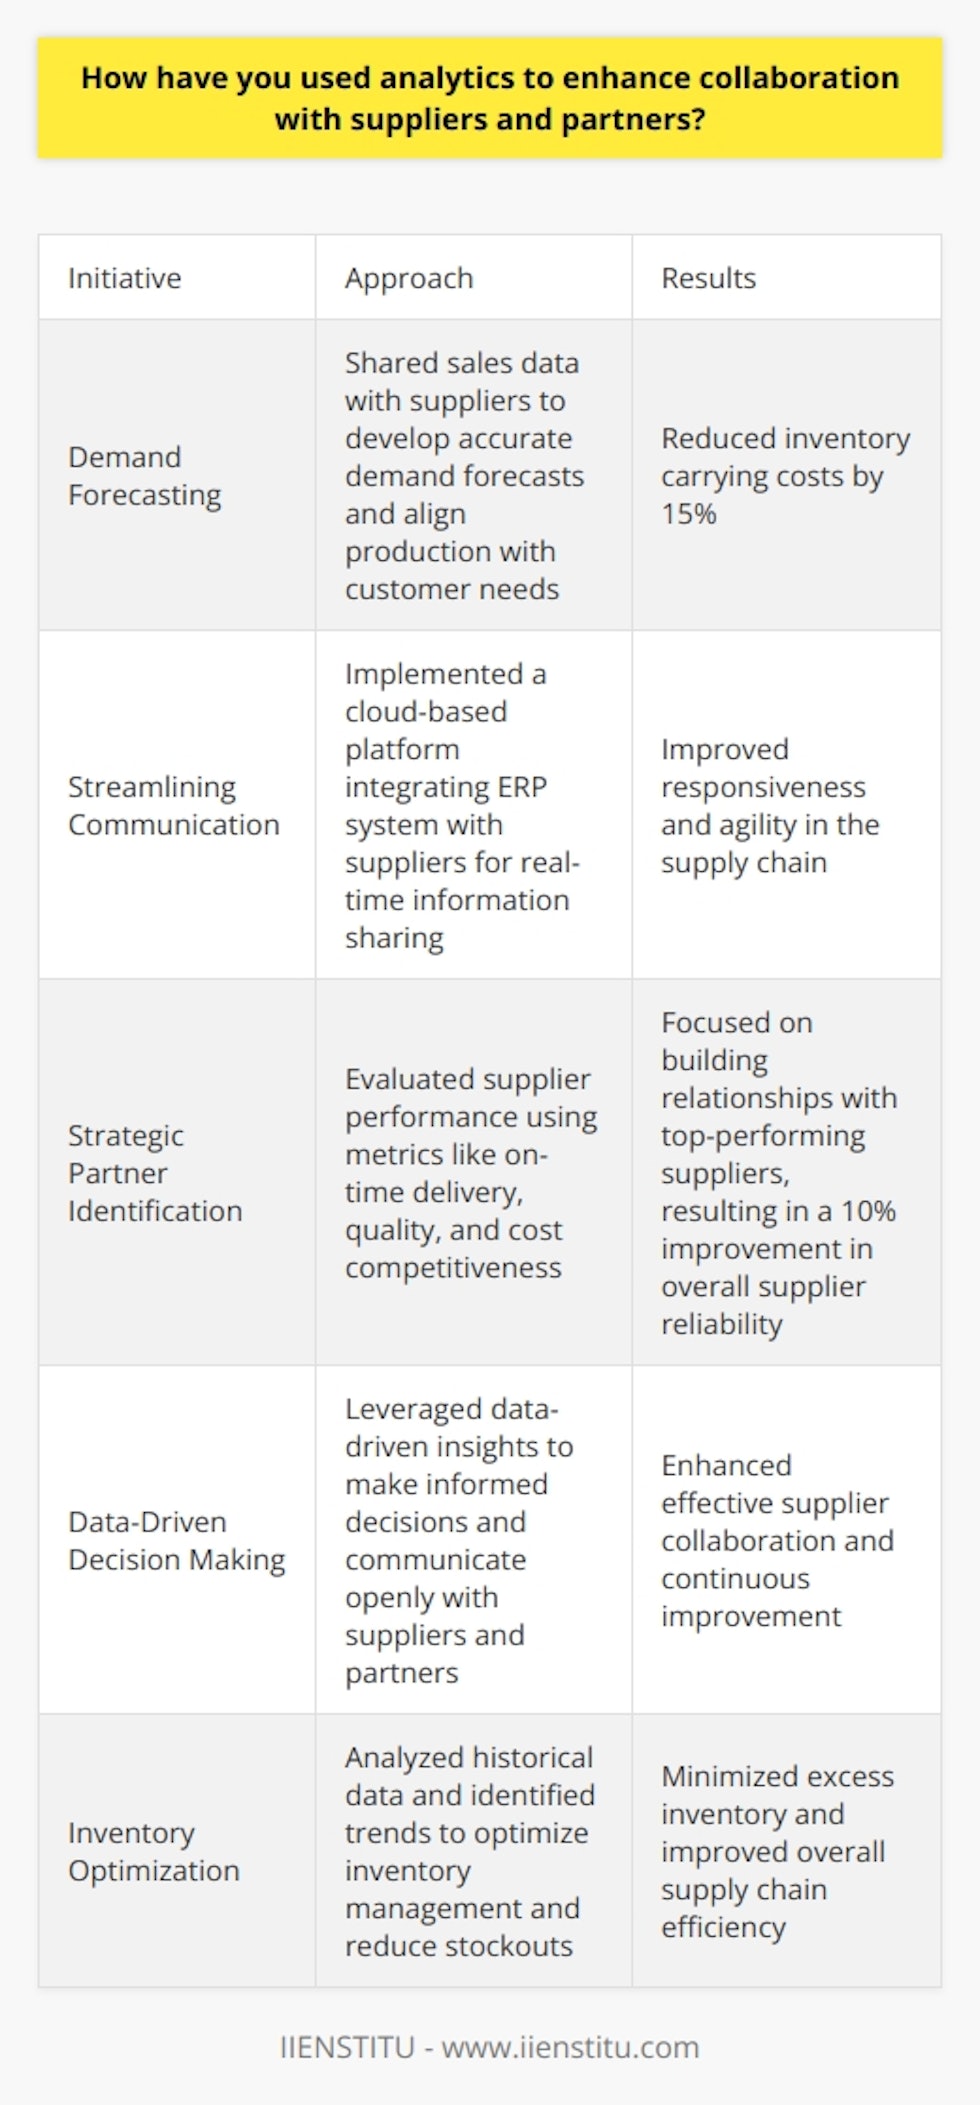 In my previous role as a supply chain analyst, I leveraged analytics to enhance collaboration with suppliers and partners. By analyzing historical data and identifying trends, I was able to optimize our inventory management and reduce stockouts. Improving Demand Forecasting I worked closely with our suppliers to share sales data and develop more accurate demand forecasts. This allowed us to better align production with customer needs and minimize excess inventory. Through this collaborative approach, we reduced inventory carrying costs by 15%. Streamlining Communication To facilitate real-time information sharing, I implemented a cloud-based platform that integrated our ERP system with our suppliers. This provided visibility into order status, shipment tracking, and potential disruptions. Having everyone on the same page improved our responsiveness and agility. Identifying Strategic Partners Analytics also helped us evaluate supplier performance and identify strategic partners for long-term growth. By assessing metrics like on-time delivery, quality, and cost competitiveness, we could focus on building relationships with top-performing suppliers. This led to a 10% improvement in overall supplier reliability. I believe that data-driven insights are key to effective supplier collaboration. When we leverage analytics to make informed decisions and communicate openly, everyone wins. Its an approach Im excited to bring to this role and continue developing.